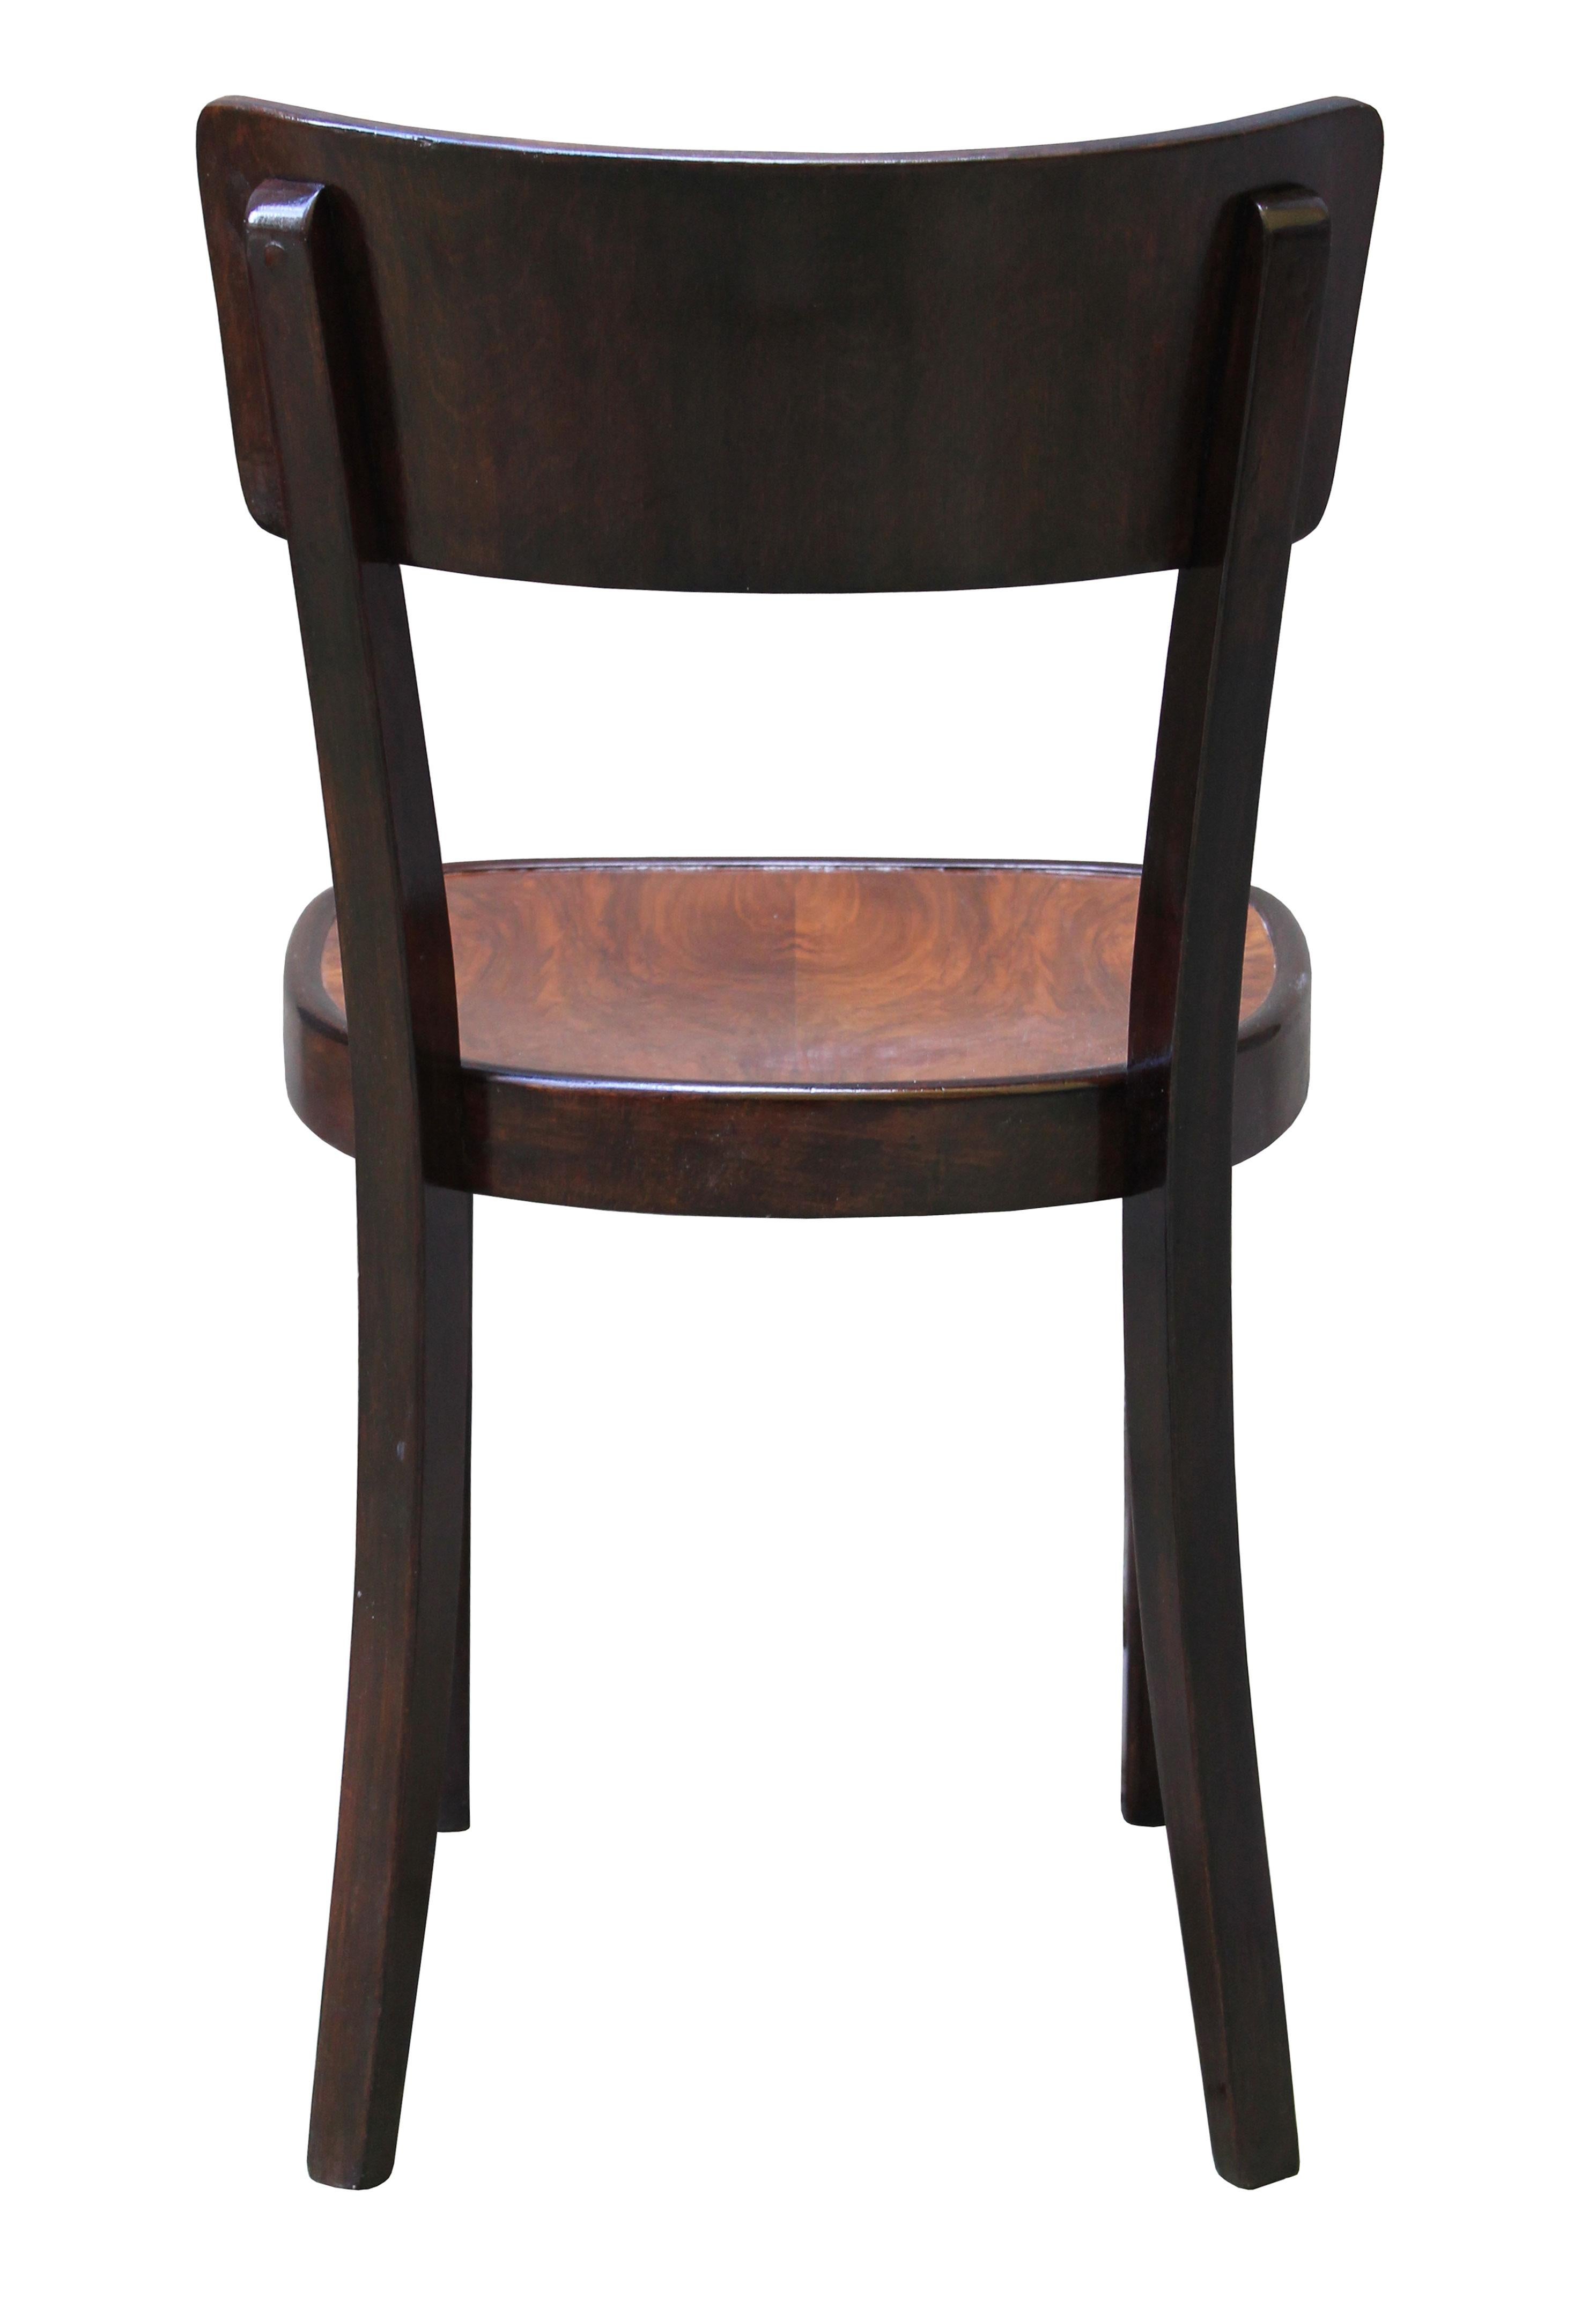 Mid-20th Century Pair of 1930s Dining Chairs Model a 524 3/4 by Thonet For Sale